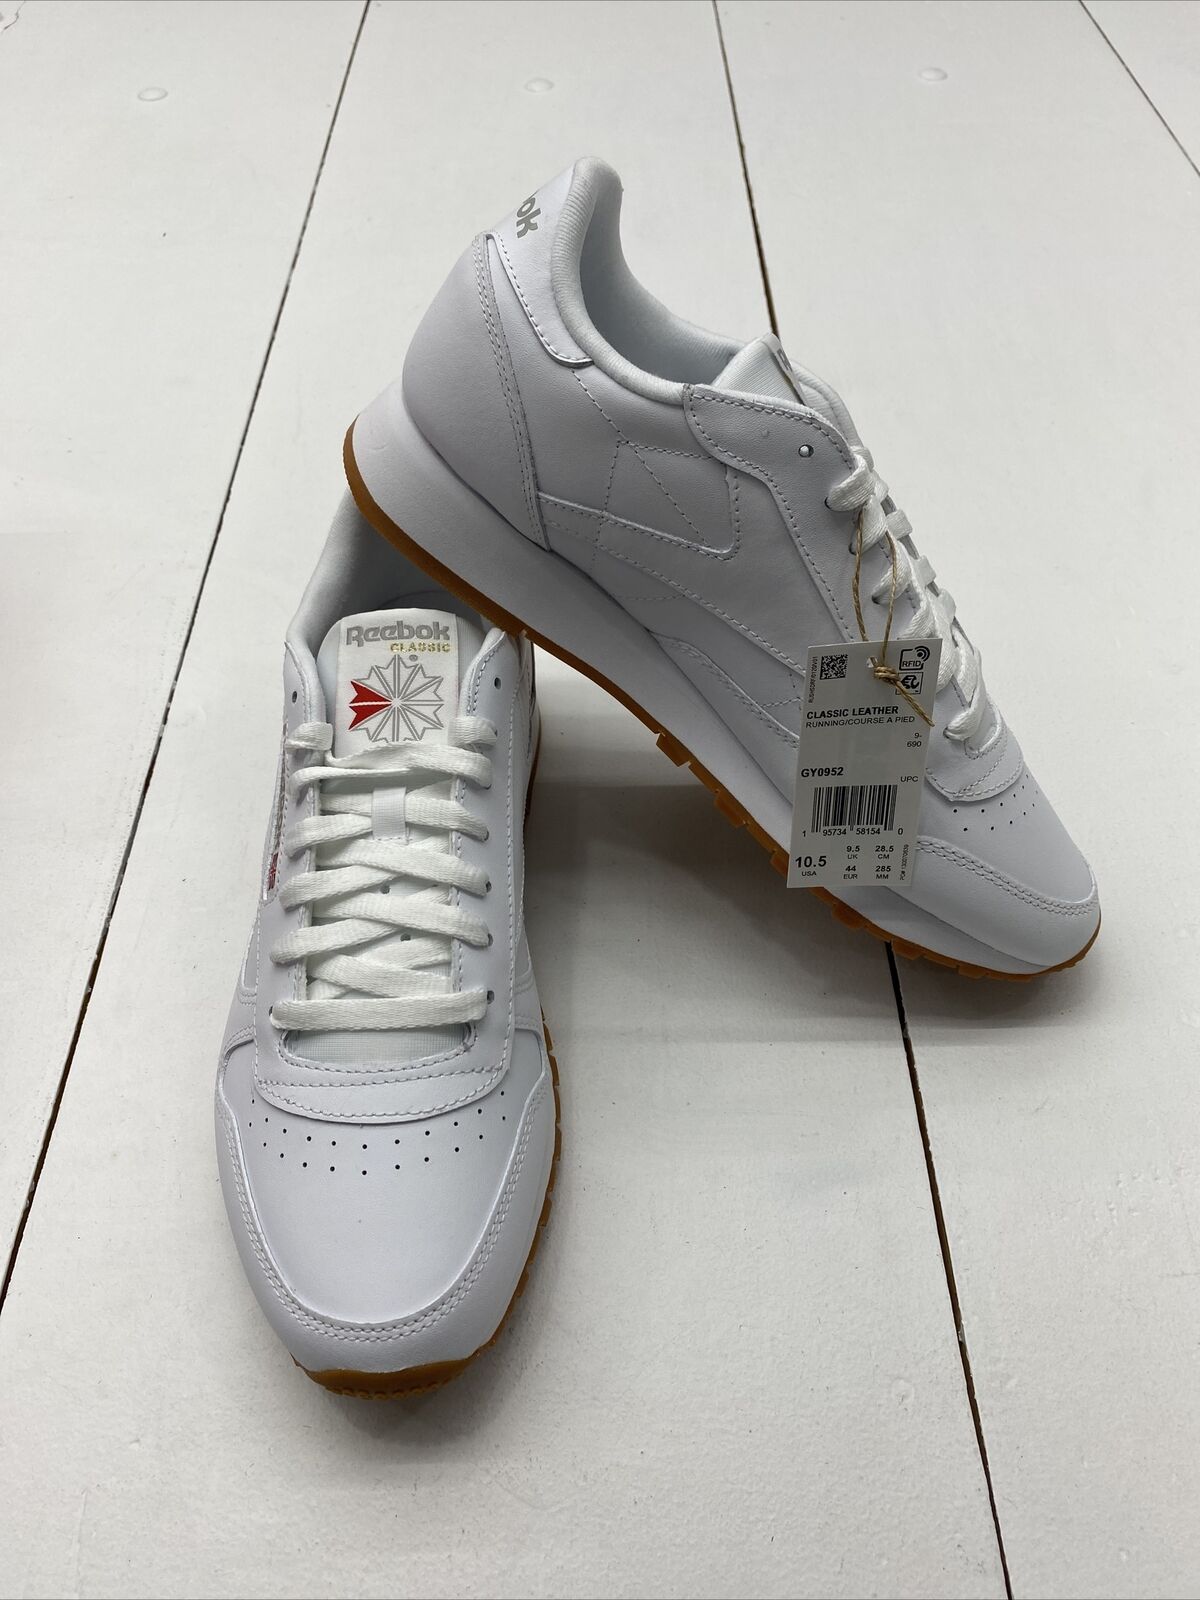 Reebok GY0952 White Unisex-Adult Size - Sneaker beyond Leather 10 exchange Classic Women